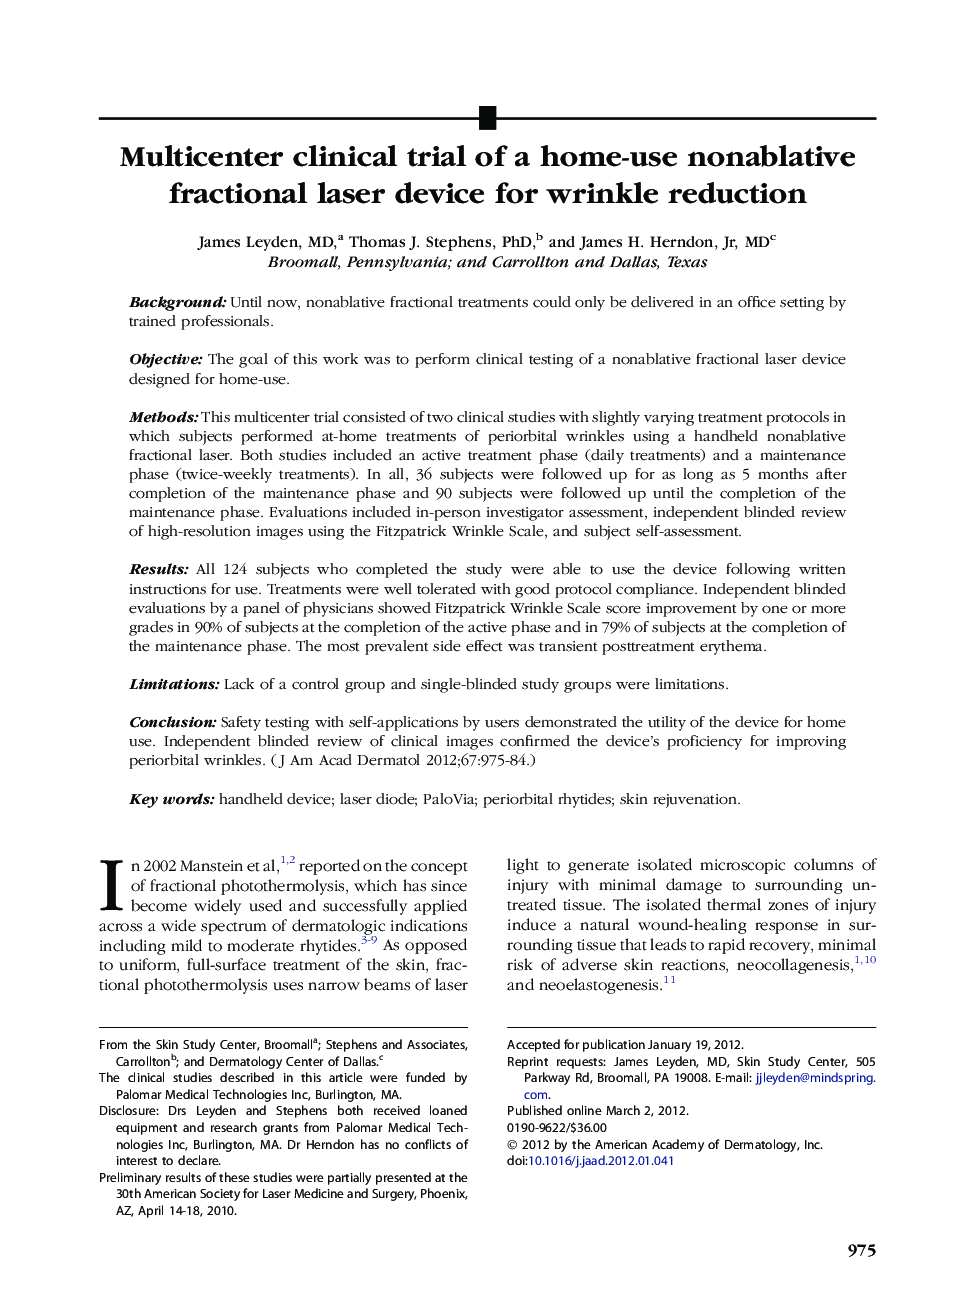 Multicenter clinical trial of a home-use nonablative fractional laser device for wrinkle reduction 